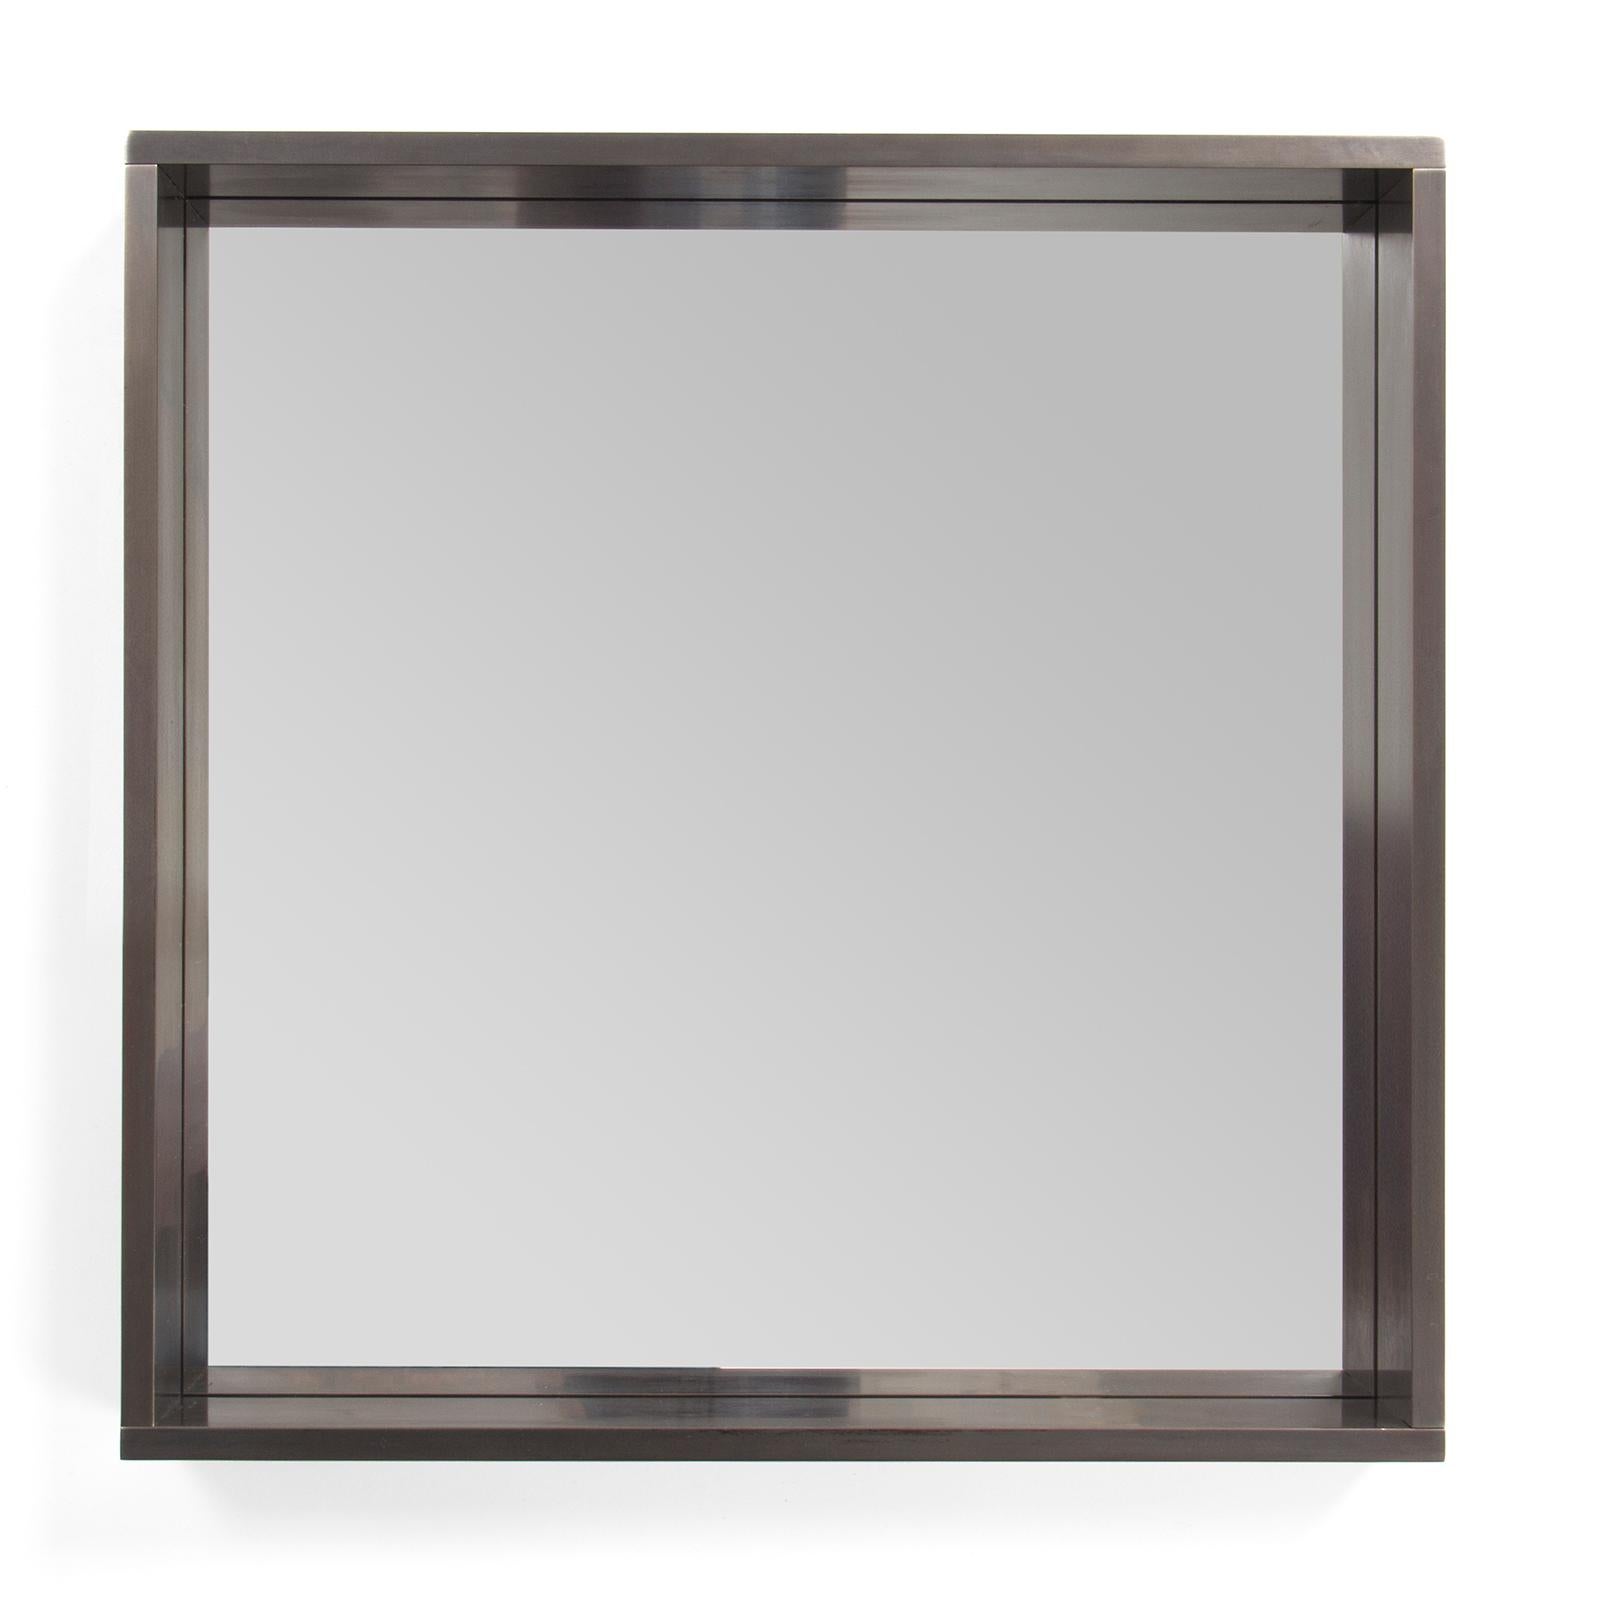 A Wyeth original, square mirror with a dovetailed, blackened steel frame. Available in custom sizes.